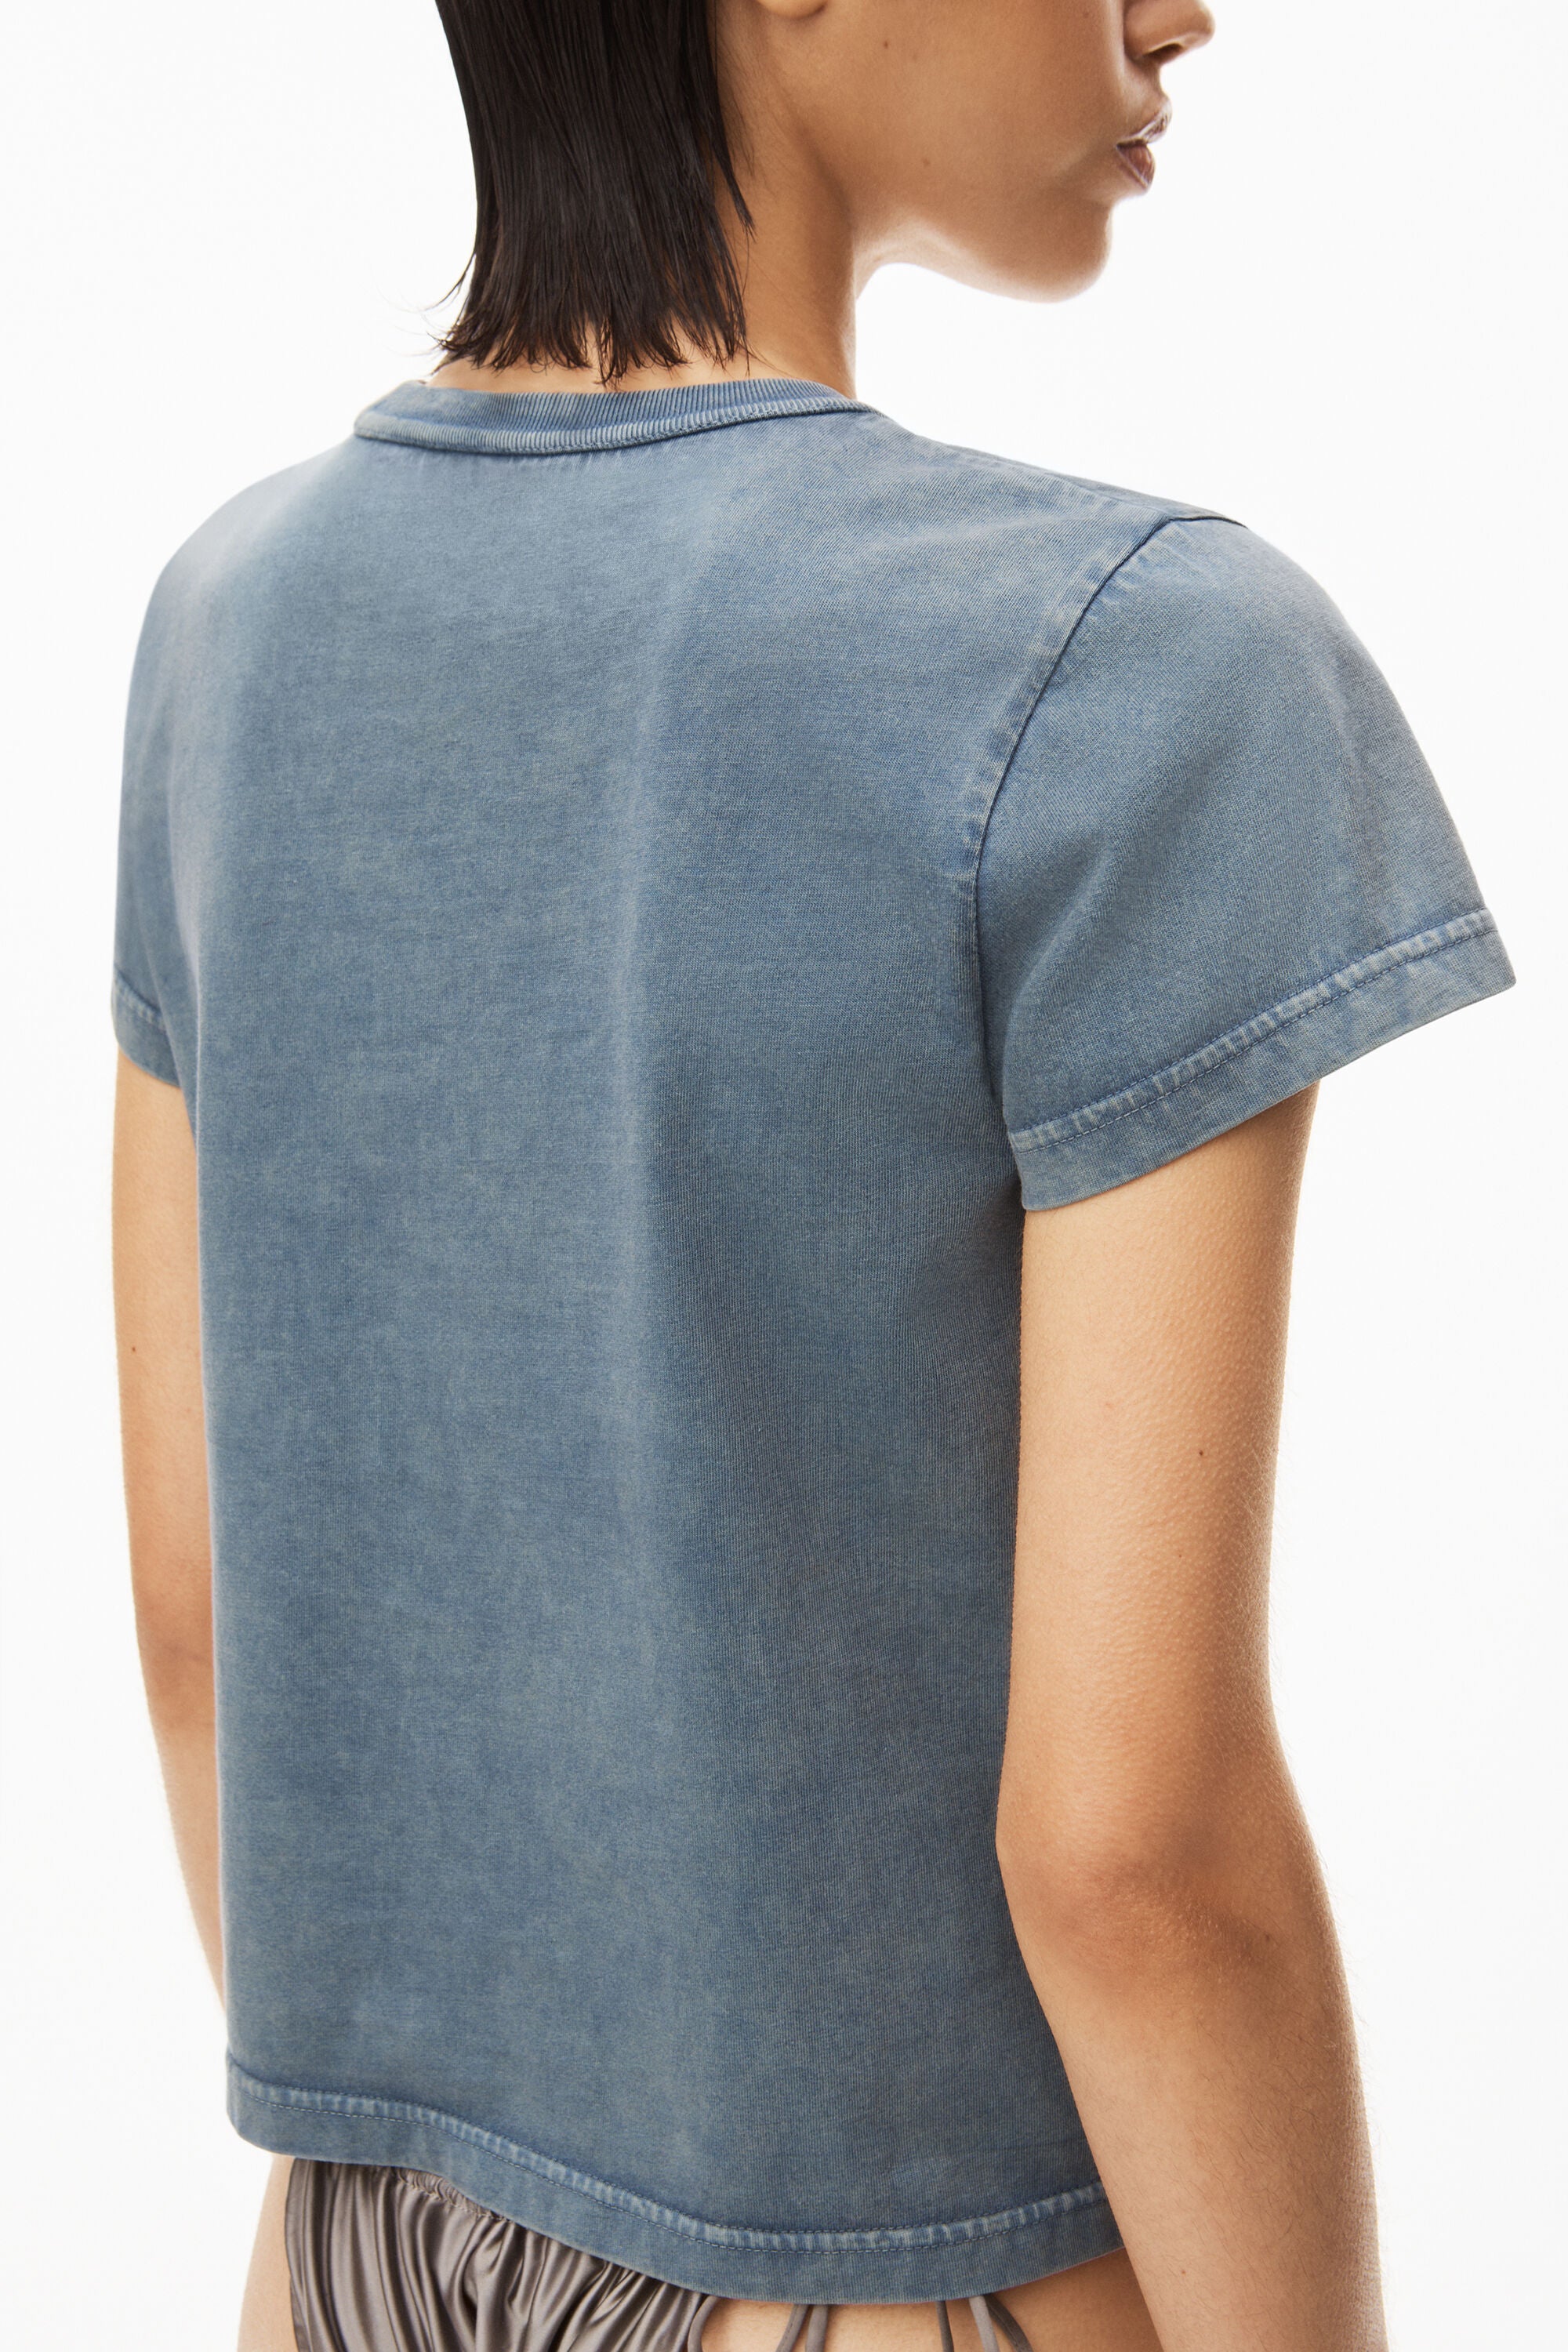 Alexander Wang Essential Jersey Shrunk Tee  by The New Trend